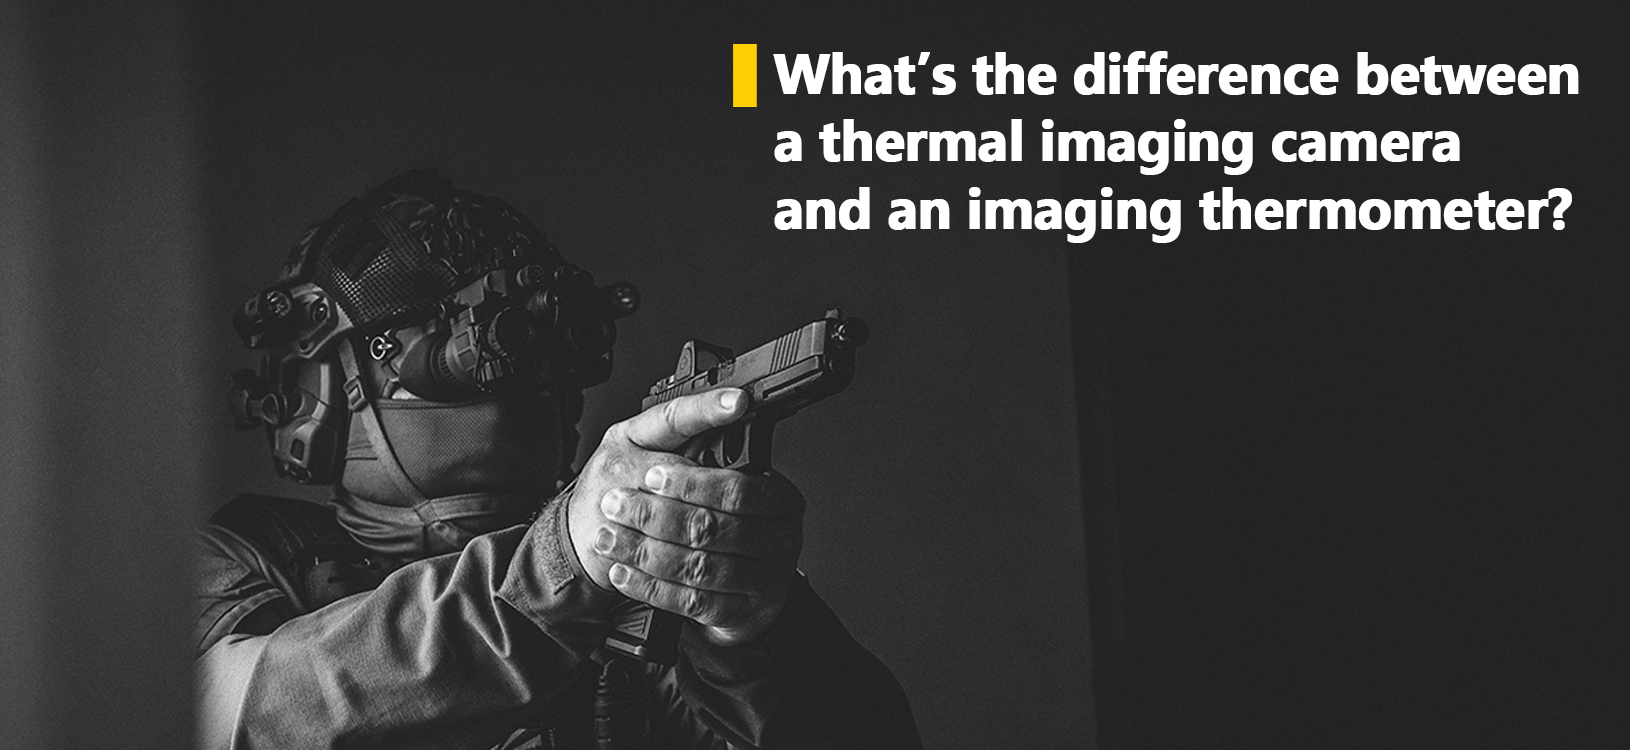 What’s the difference between a thermal imaging camera and an imaging thermometer?